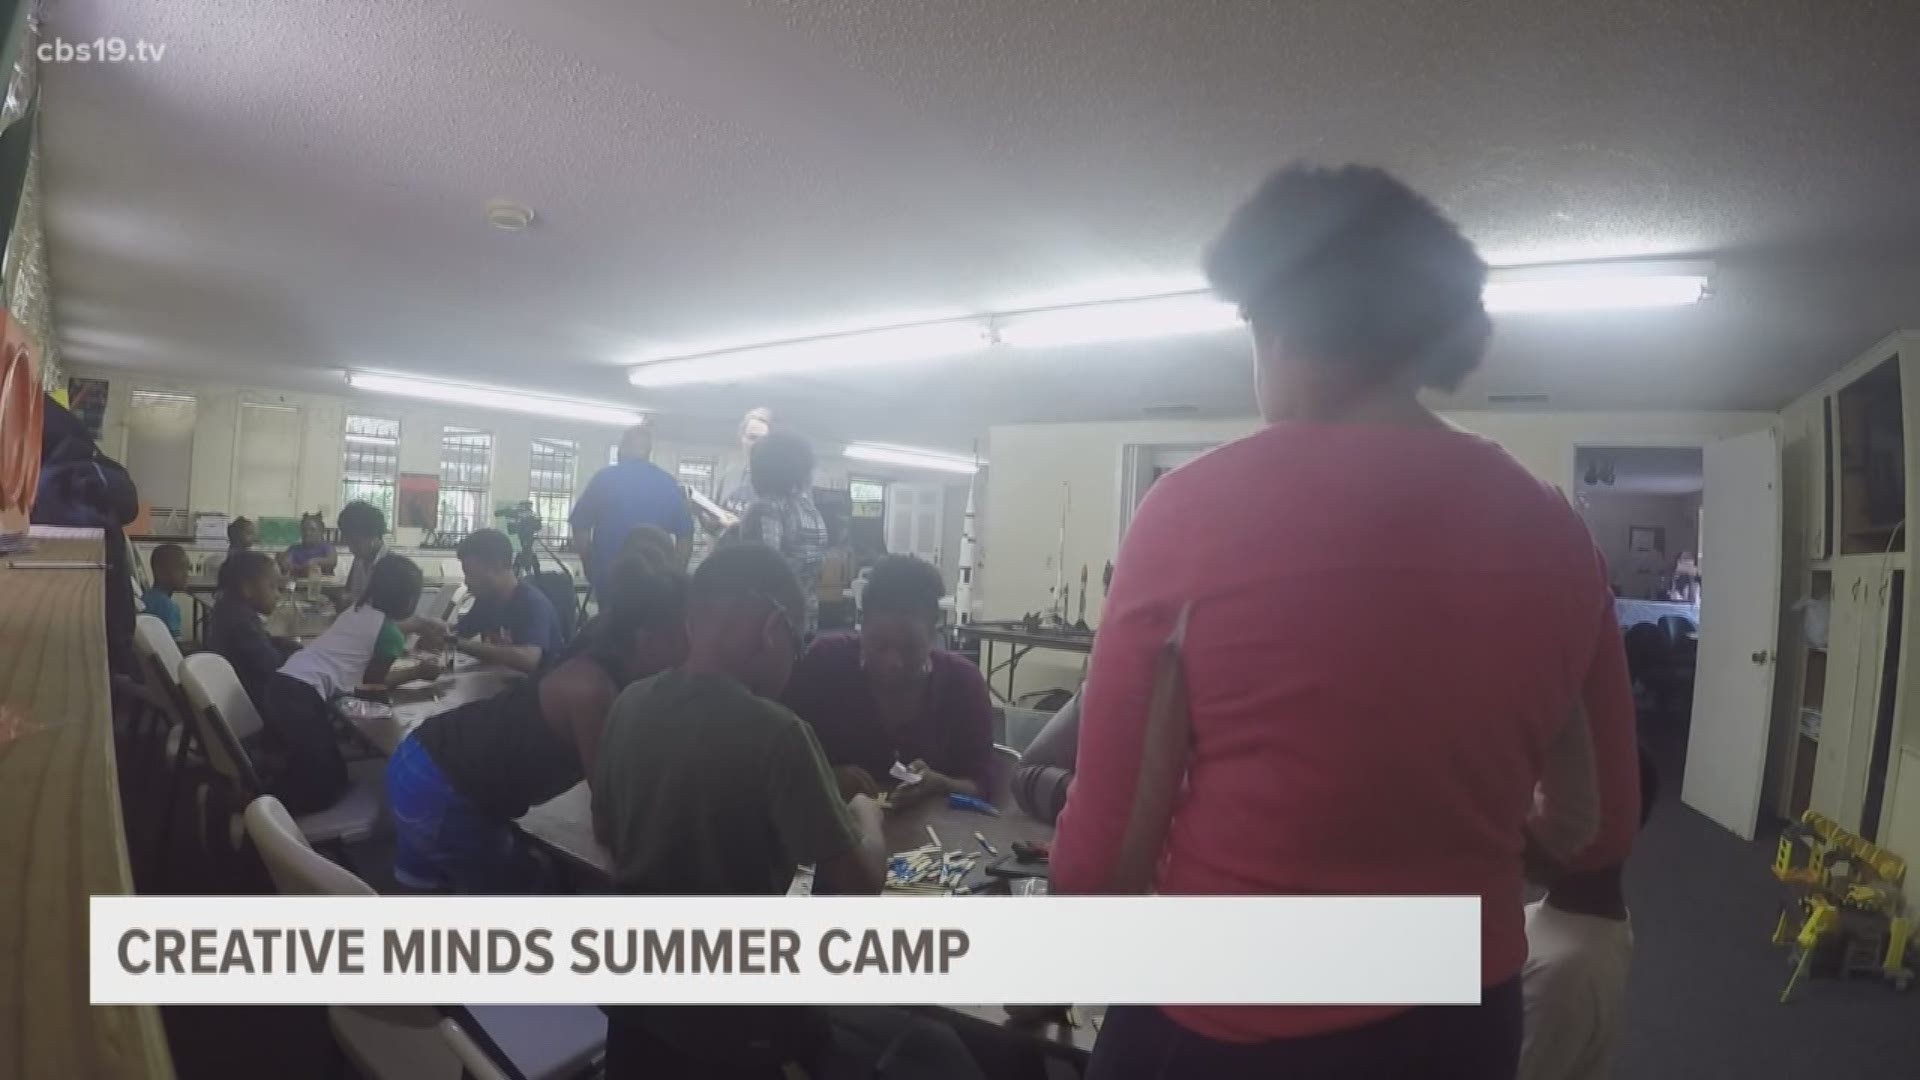 Local woman starts "artistic" summer camp